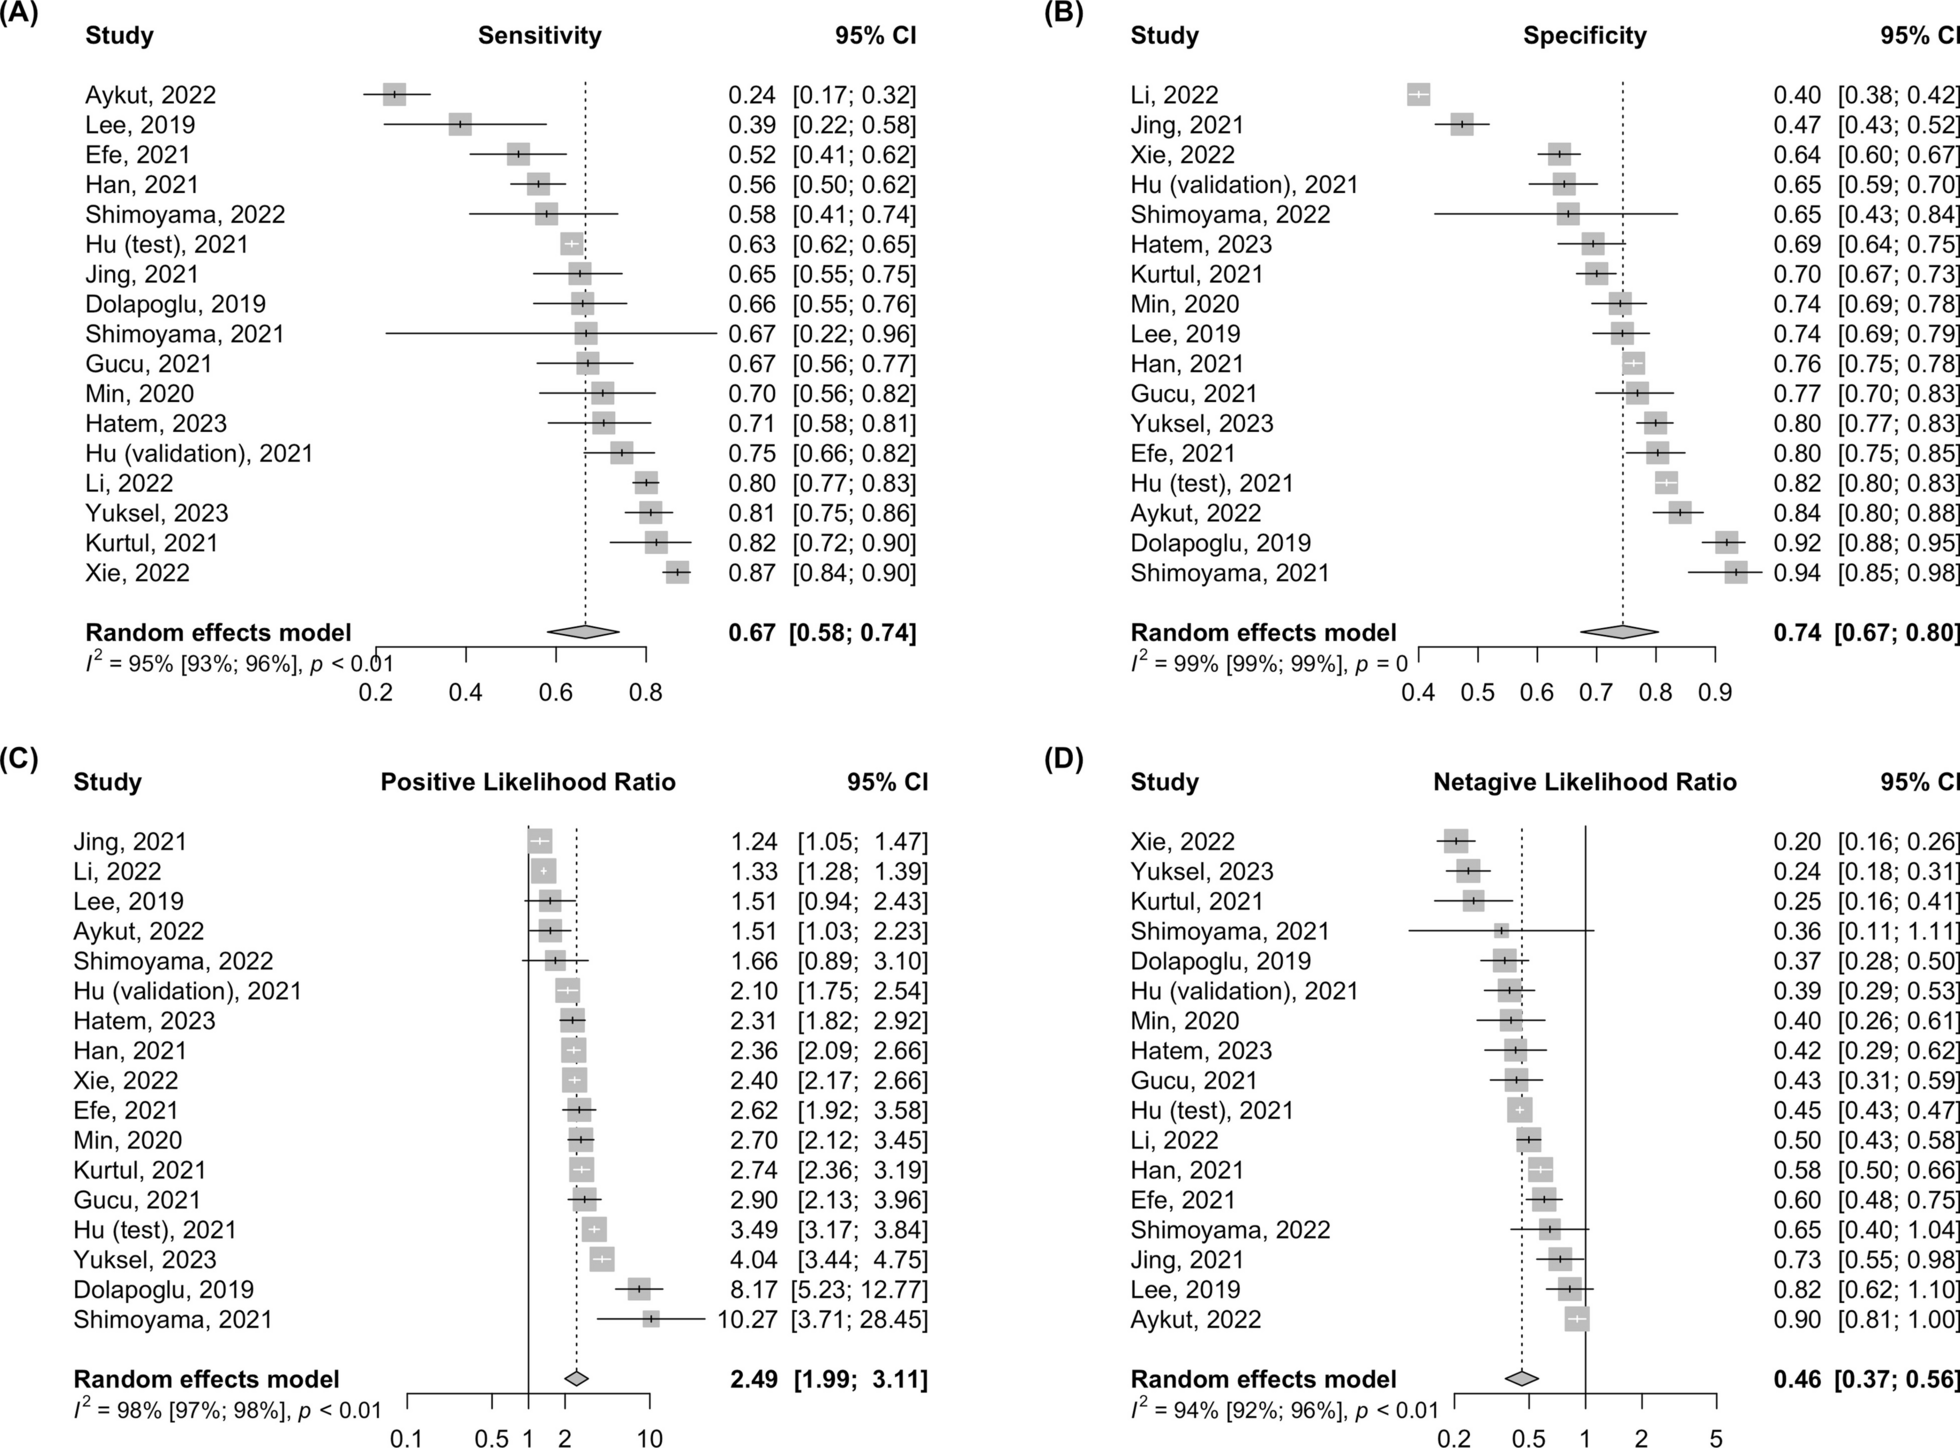 Prognostic nutritional index as a predictive marker for acute kidney injury in adult critical illness population: a systematic review and diagnostic test accuracy meta-analysis